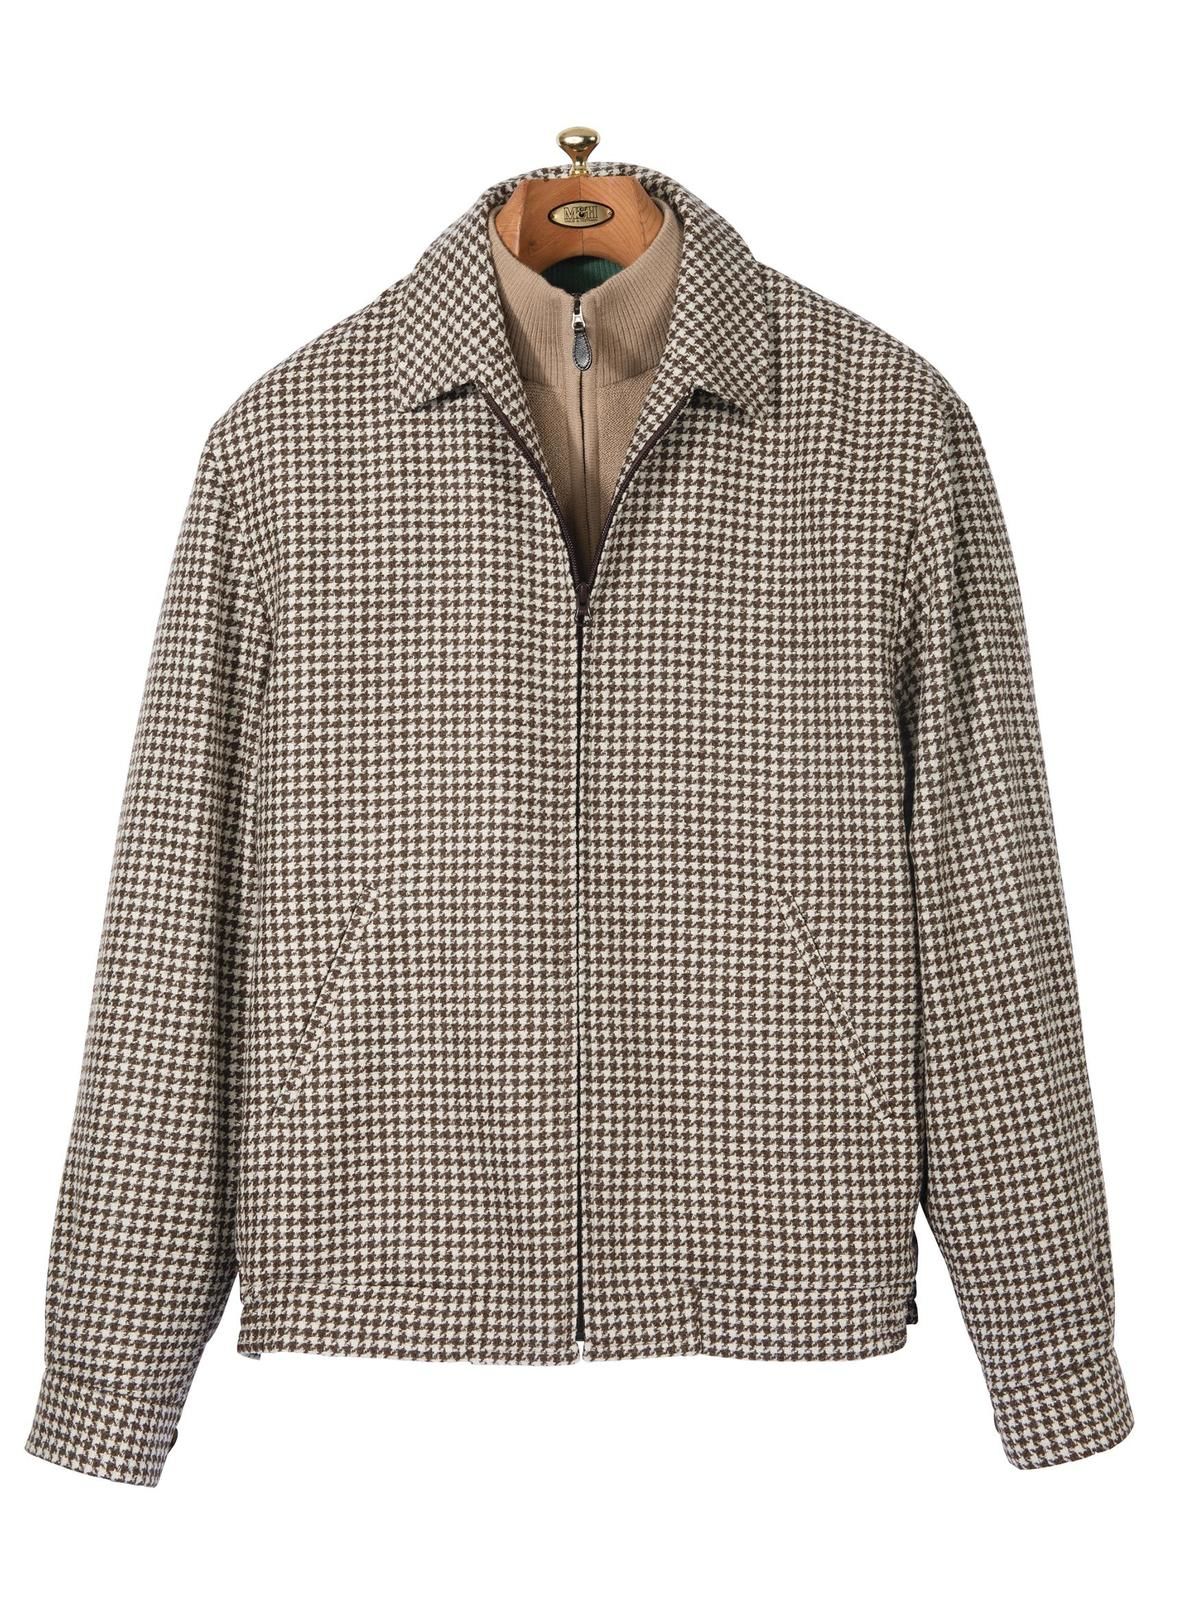 Lawrence Houndstooth Blouson